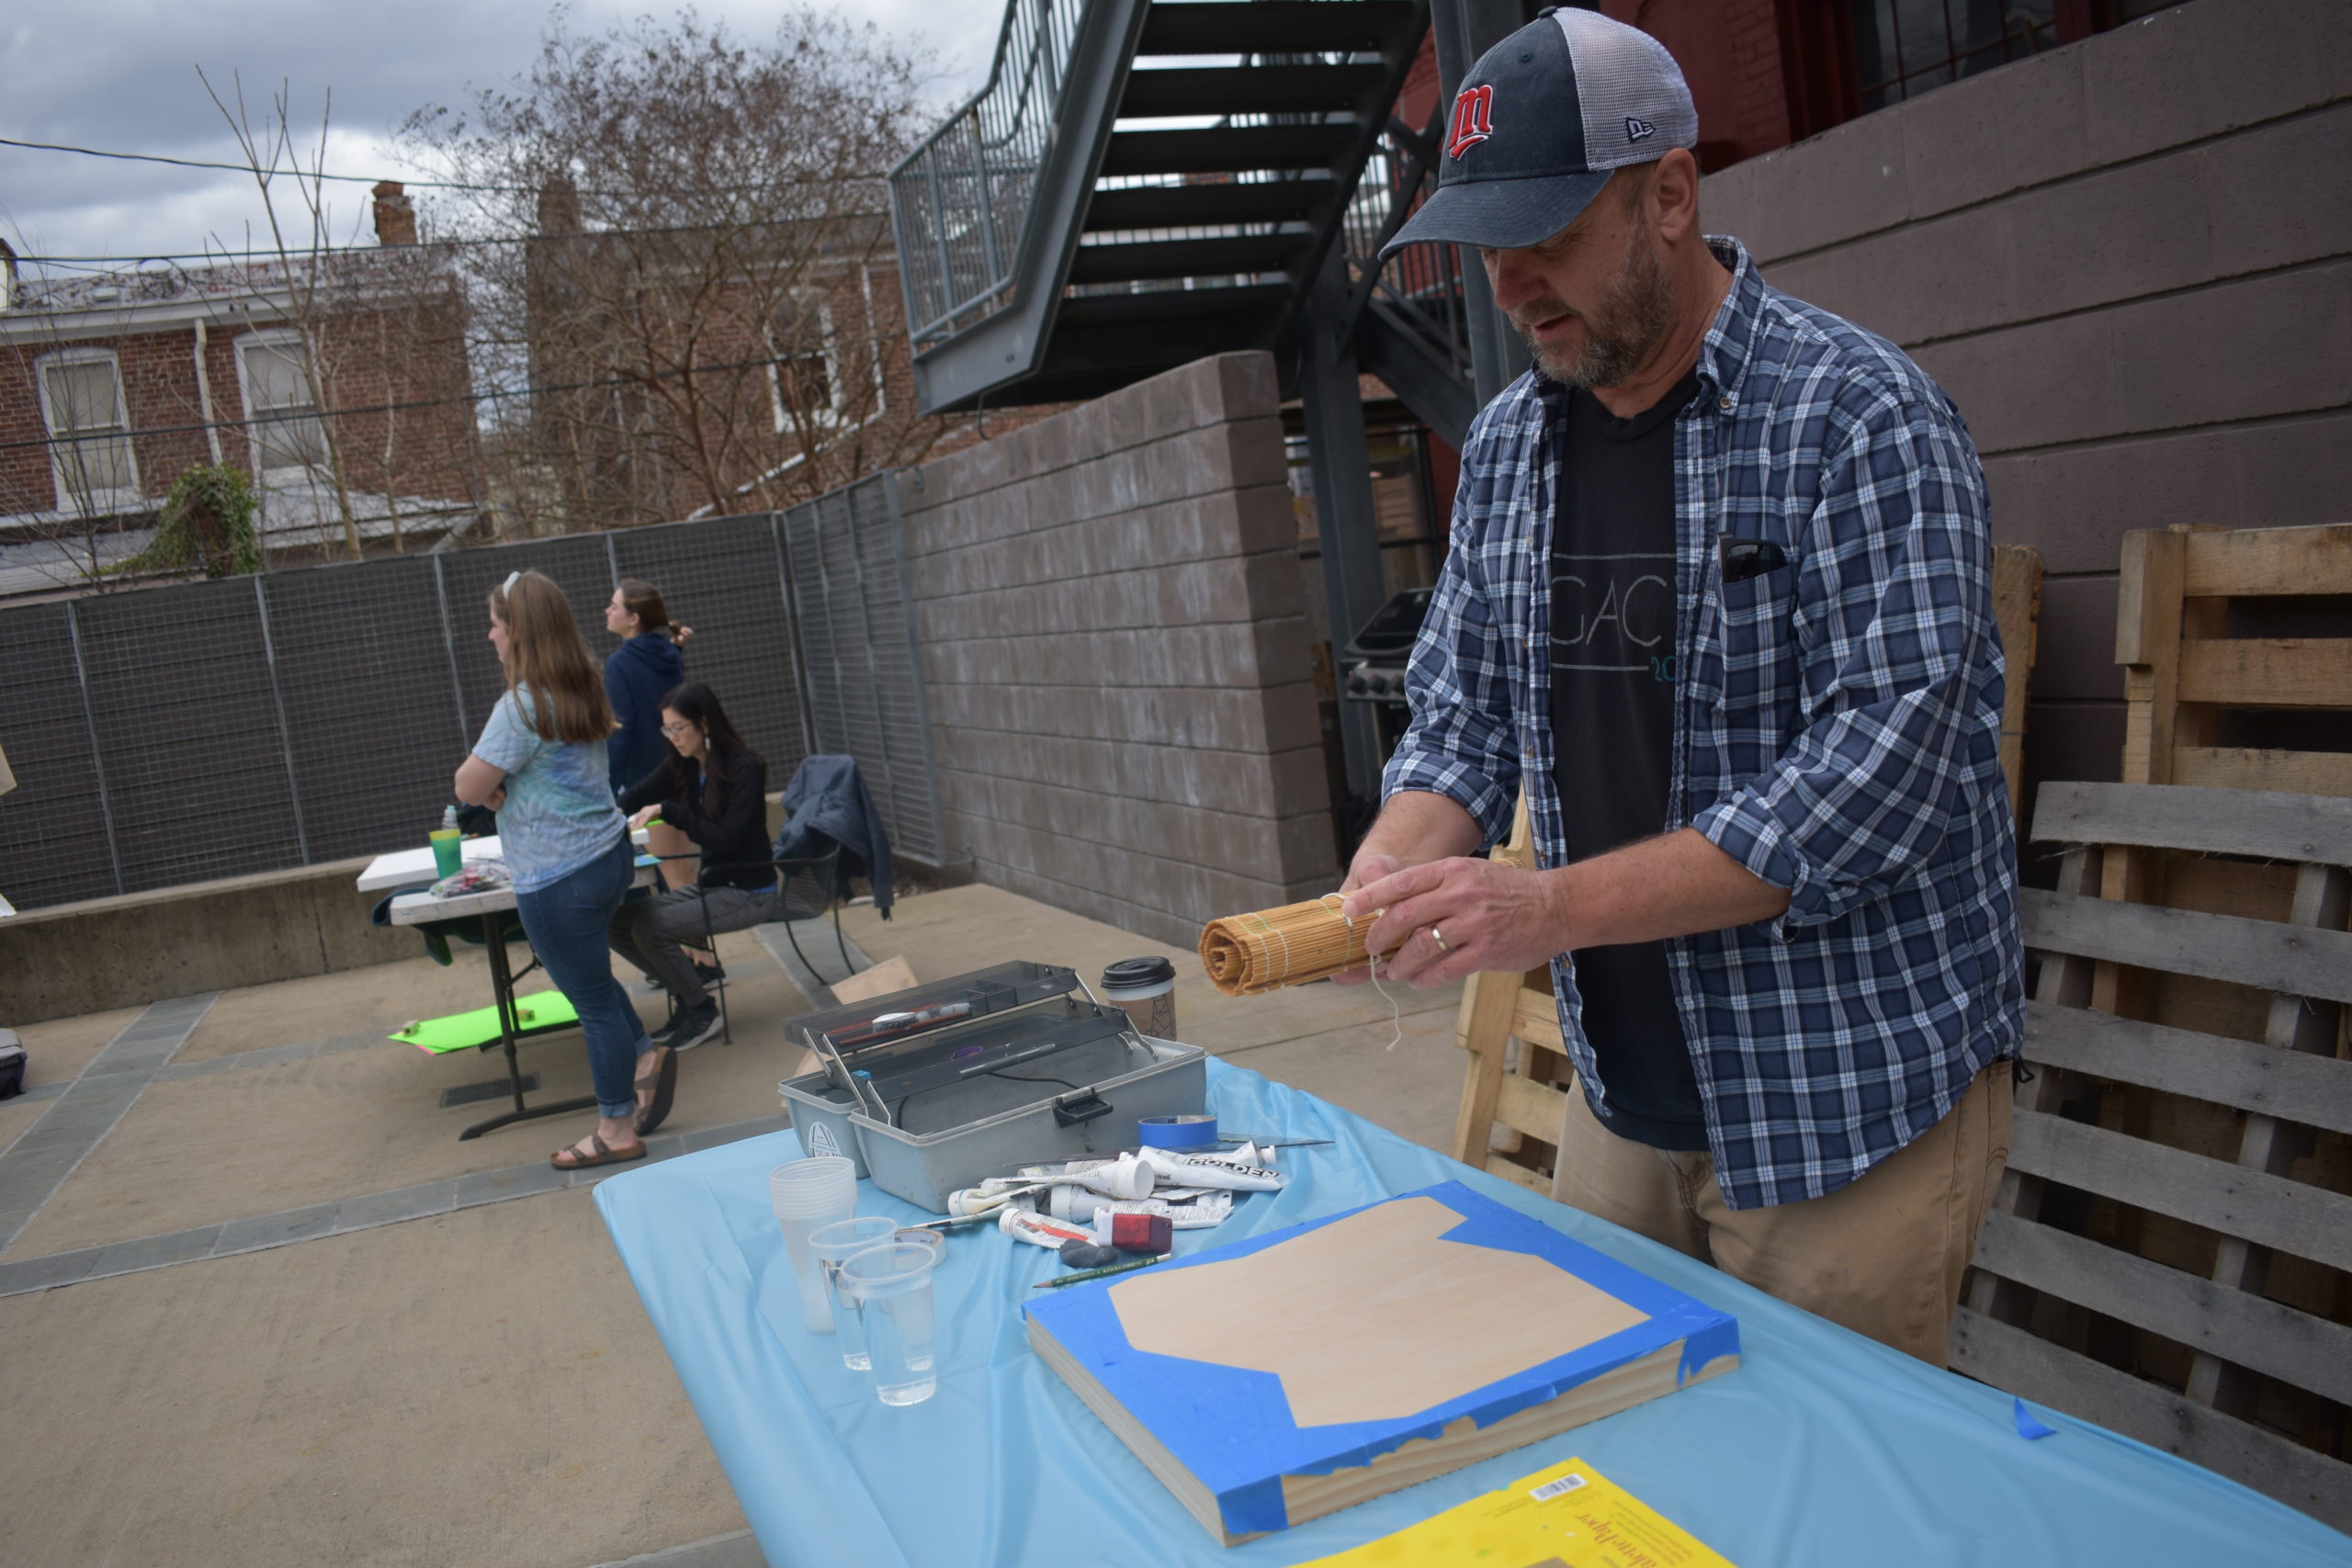 A man wearing a baseball cap is standing outdoors at a table with a wooden canvas and tubes of paint